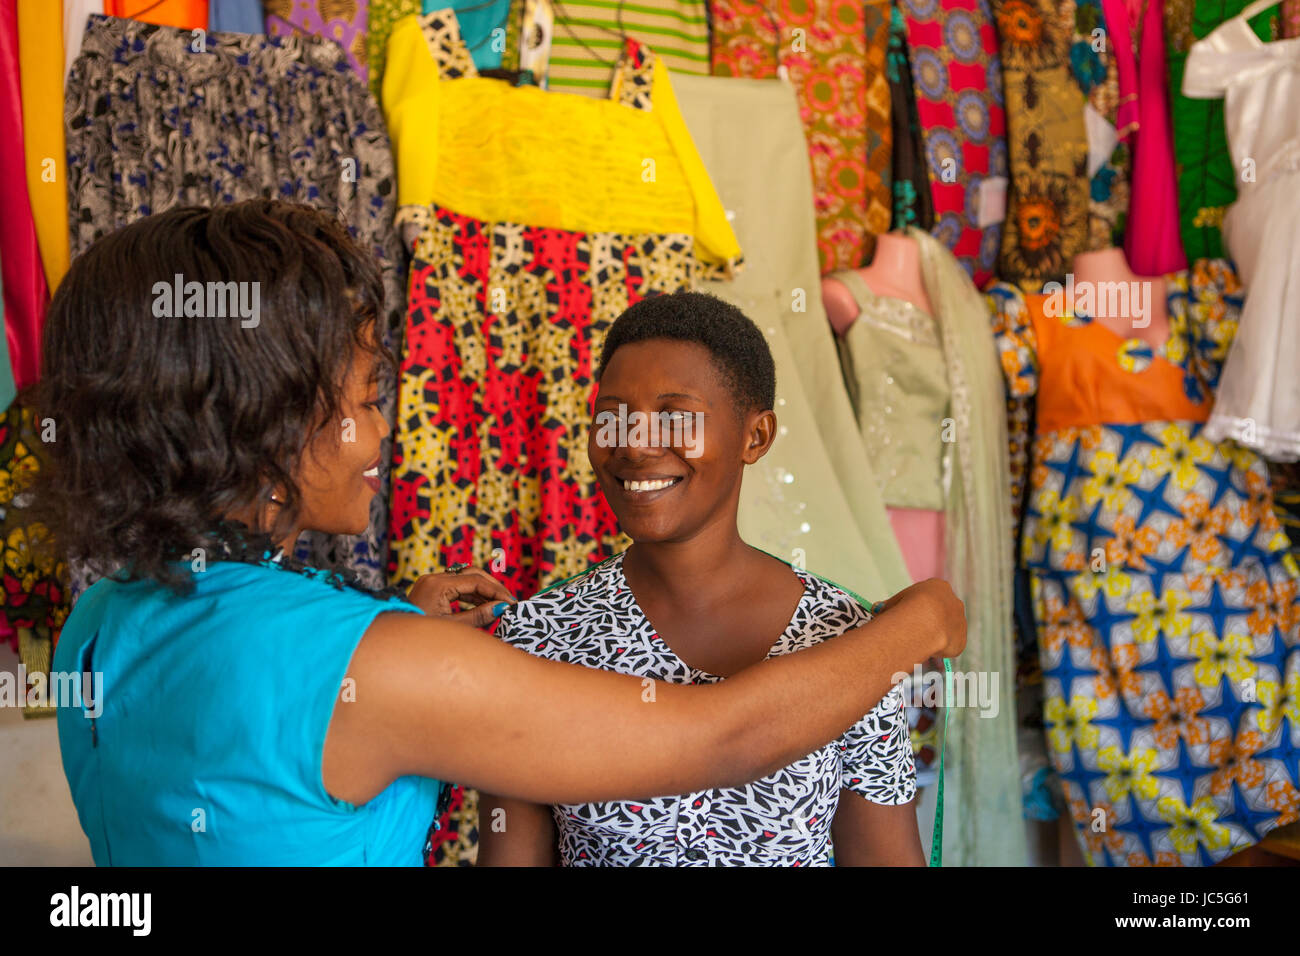 A small business female tailor measuring a customer, Tanzania, Africa. Stock Photo